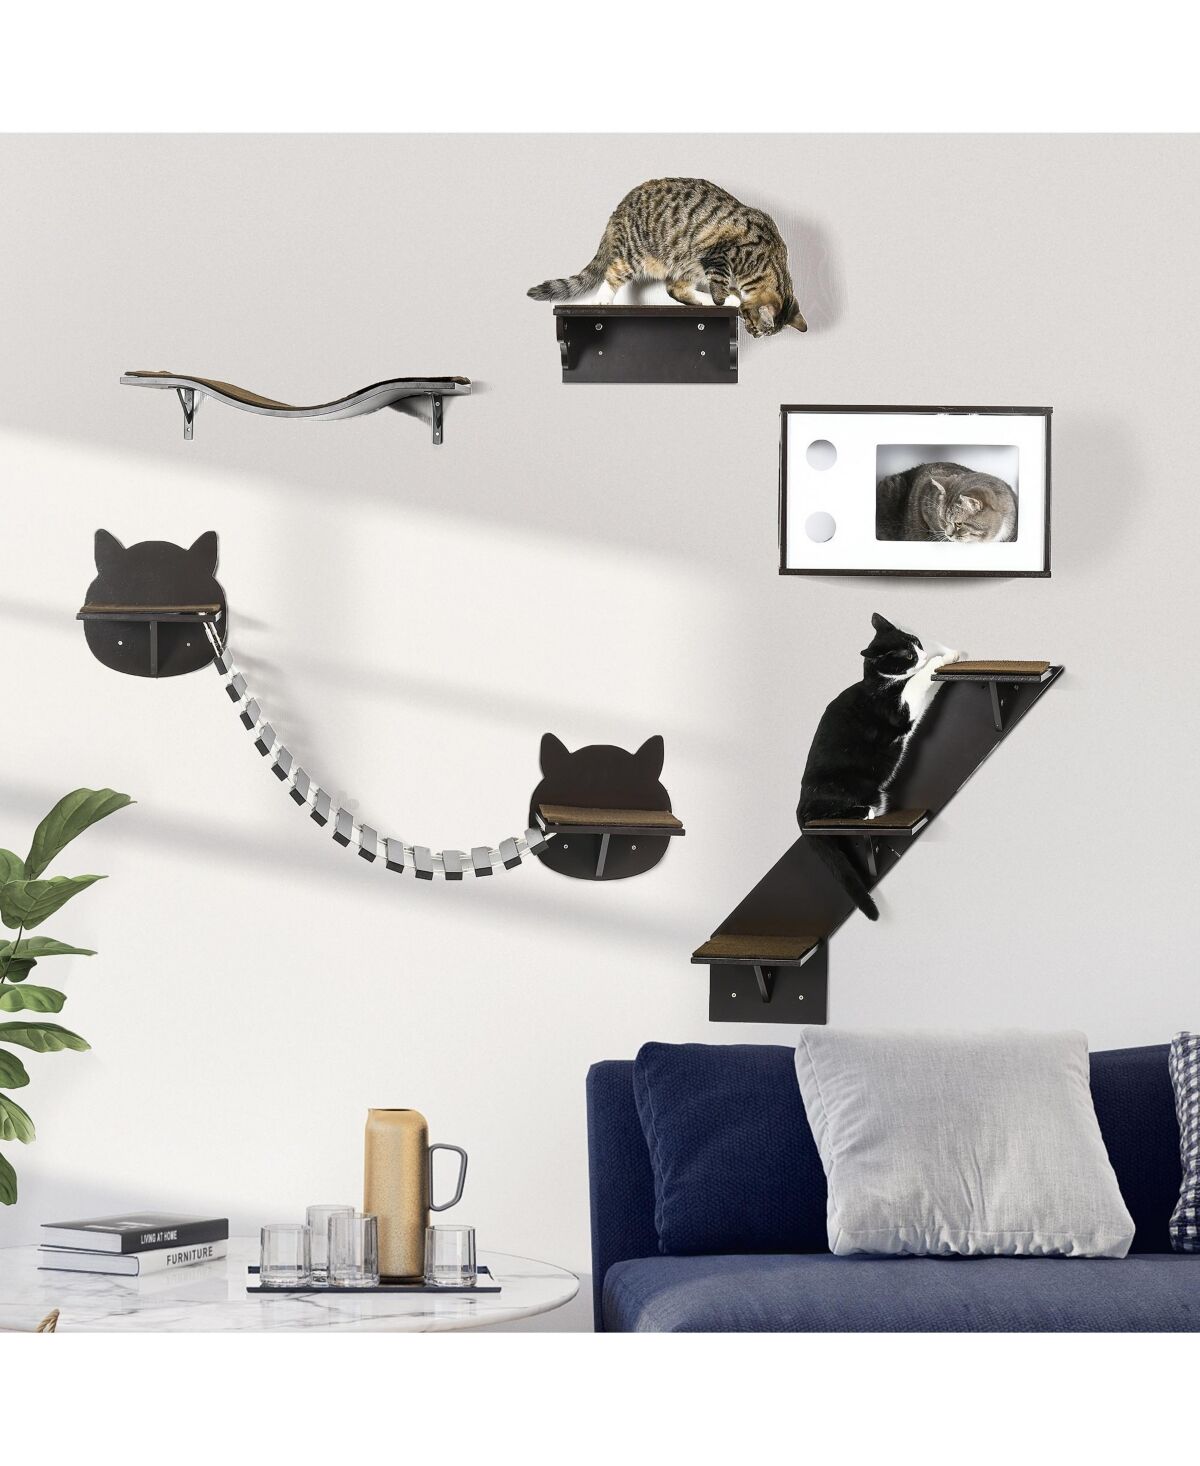 PawHut Cat Shelves with Ergonomically Curved Platform, Cozy Cat House, Bridge, Easy Stairs, and Flat Perch, Wall-Mounted Cat Tree Climbing Playground,